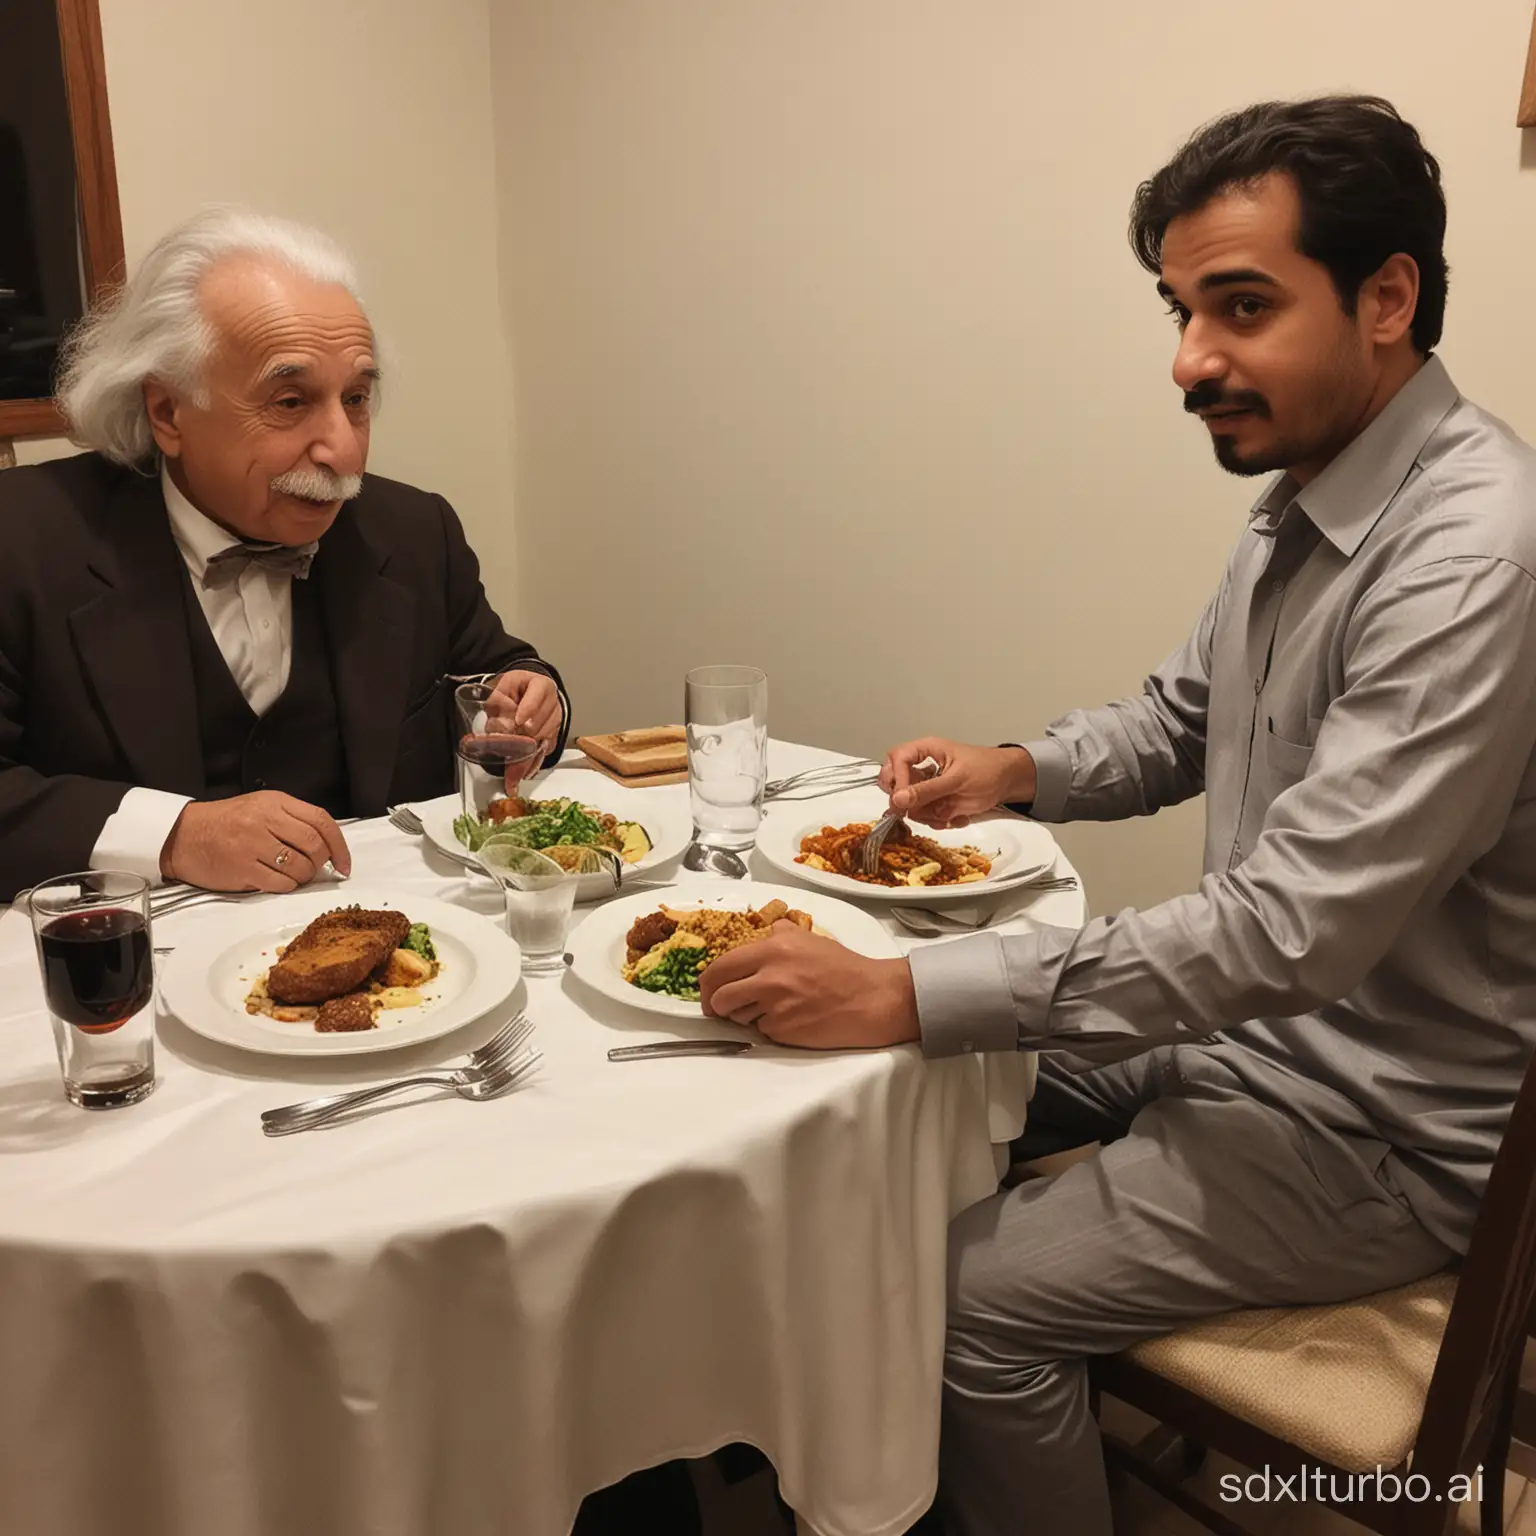 Awais-Isane-and-Einstein-Dining-Together-A-Unique-Encounter-of-Brilliance-and-Conversation